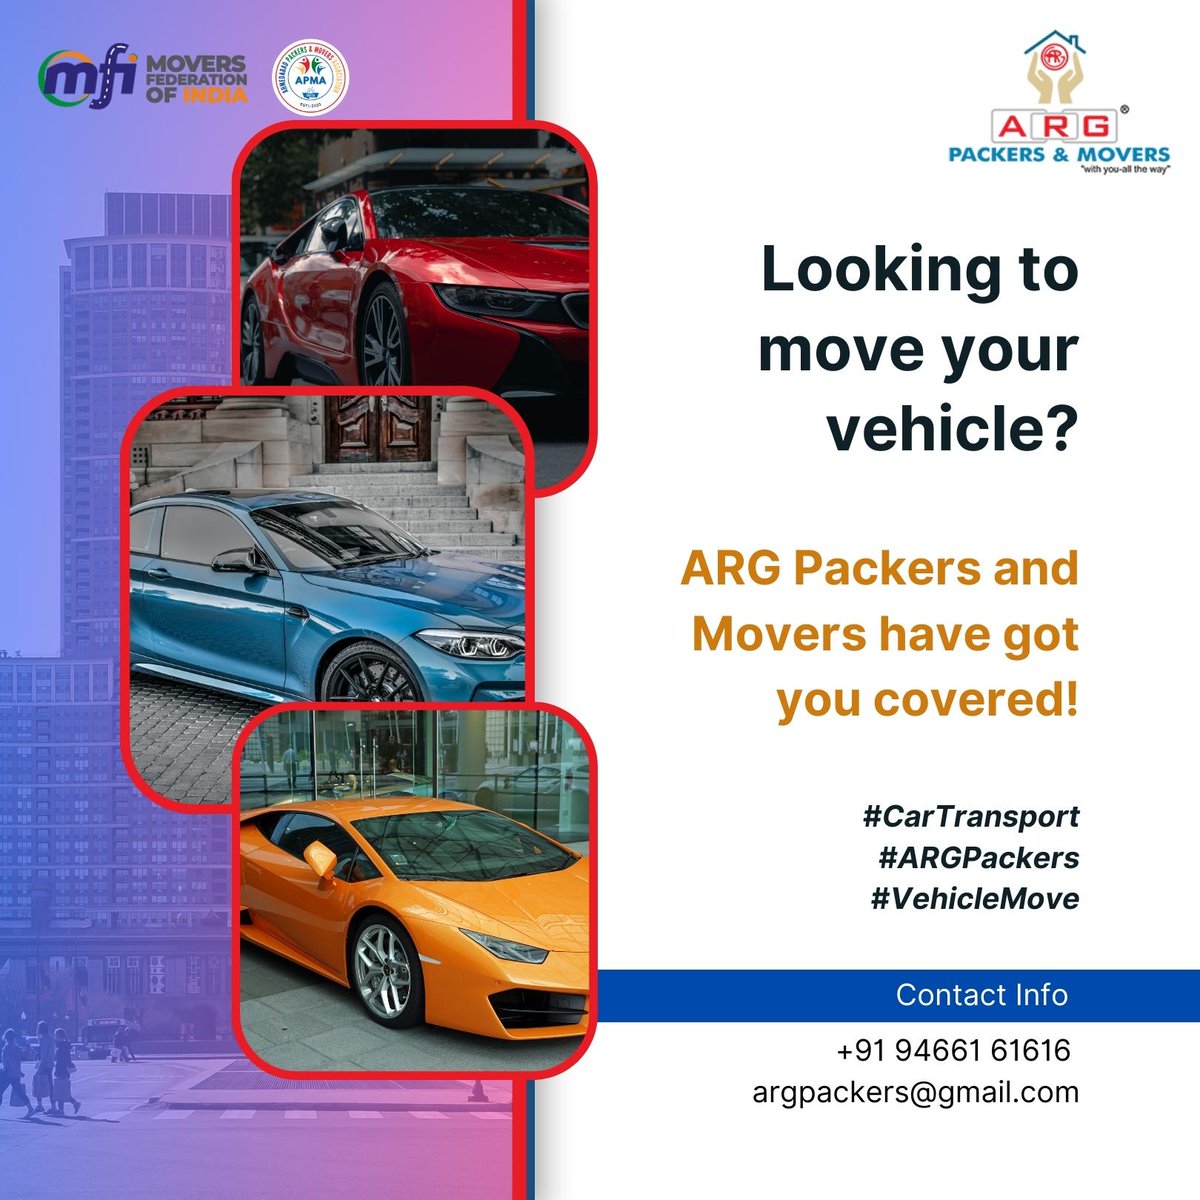 Need safe vehicle transport services across India? ARG Packers and Movers is your go-to choice! Offering top-notch car transportation at budget-friendly rates, we ensure a smooth move for you.

#CarTransport #VehicleRelocation #ARGPackers #SafeMoving  #AllIndiaTransport